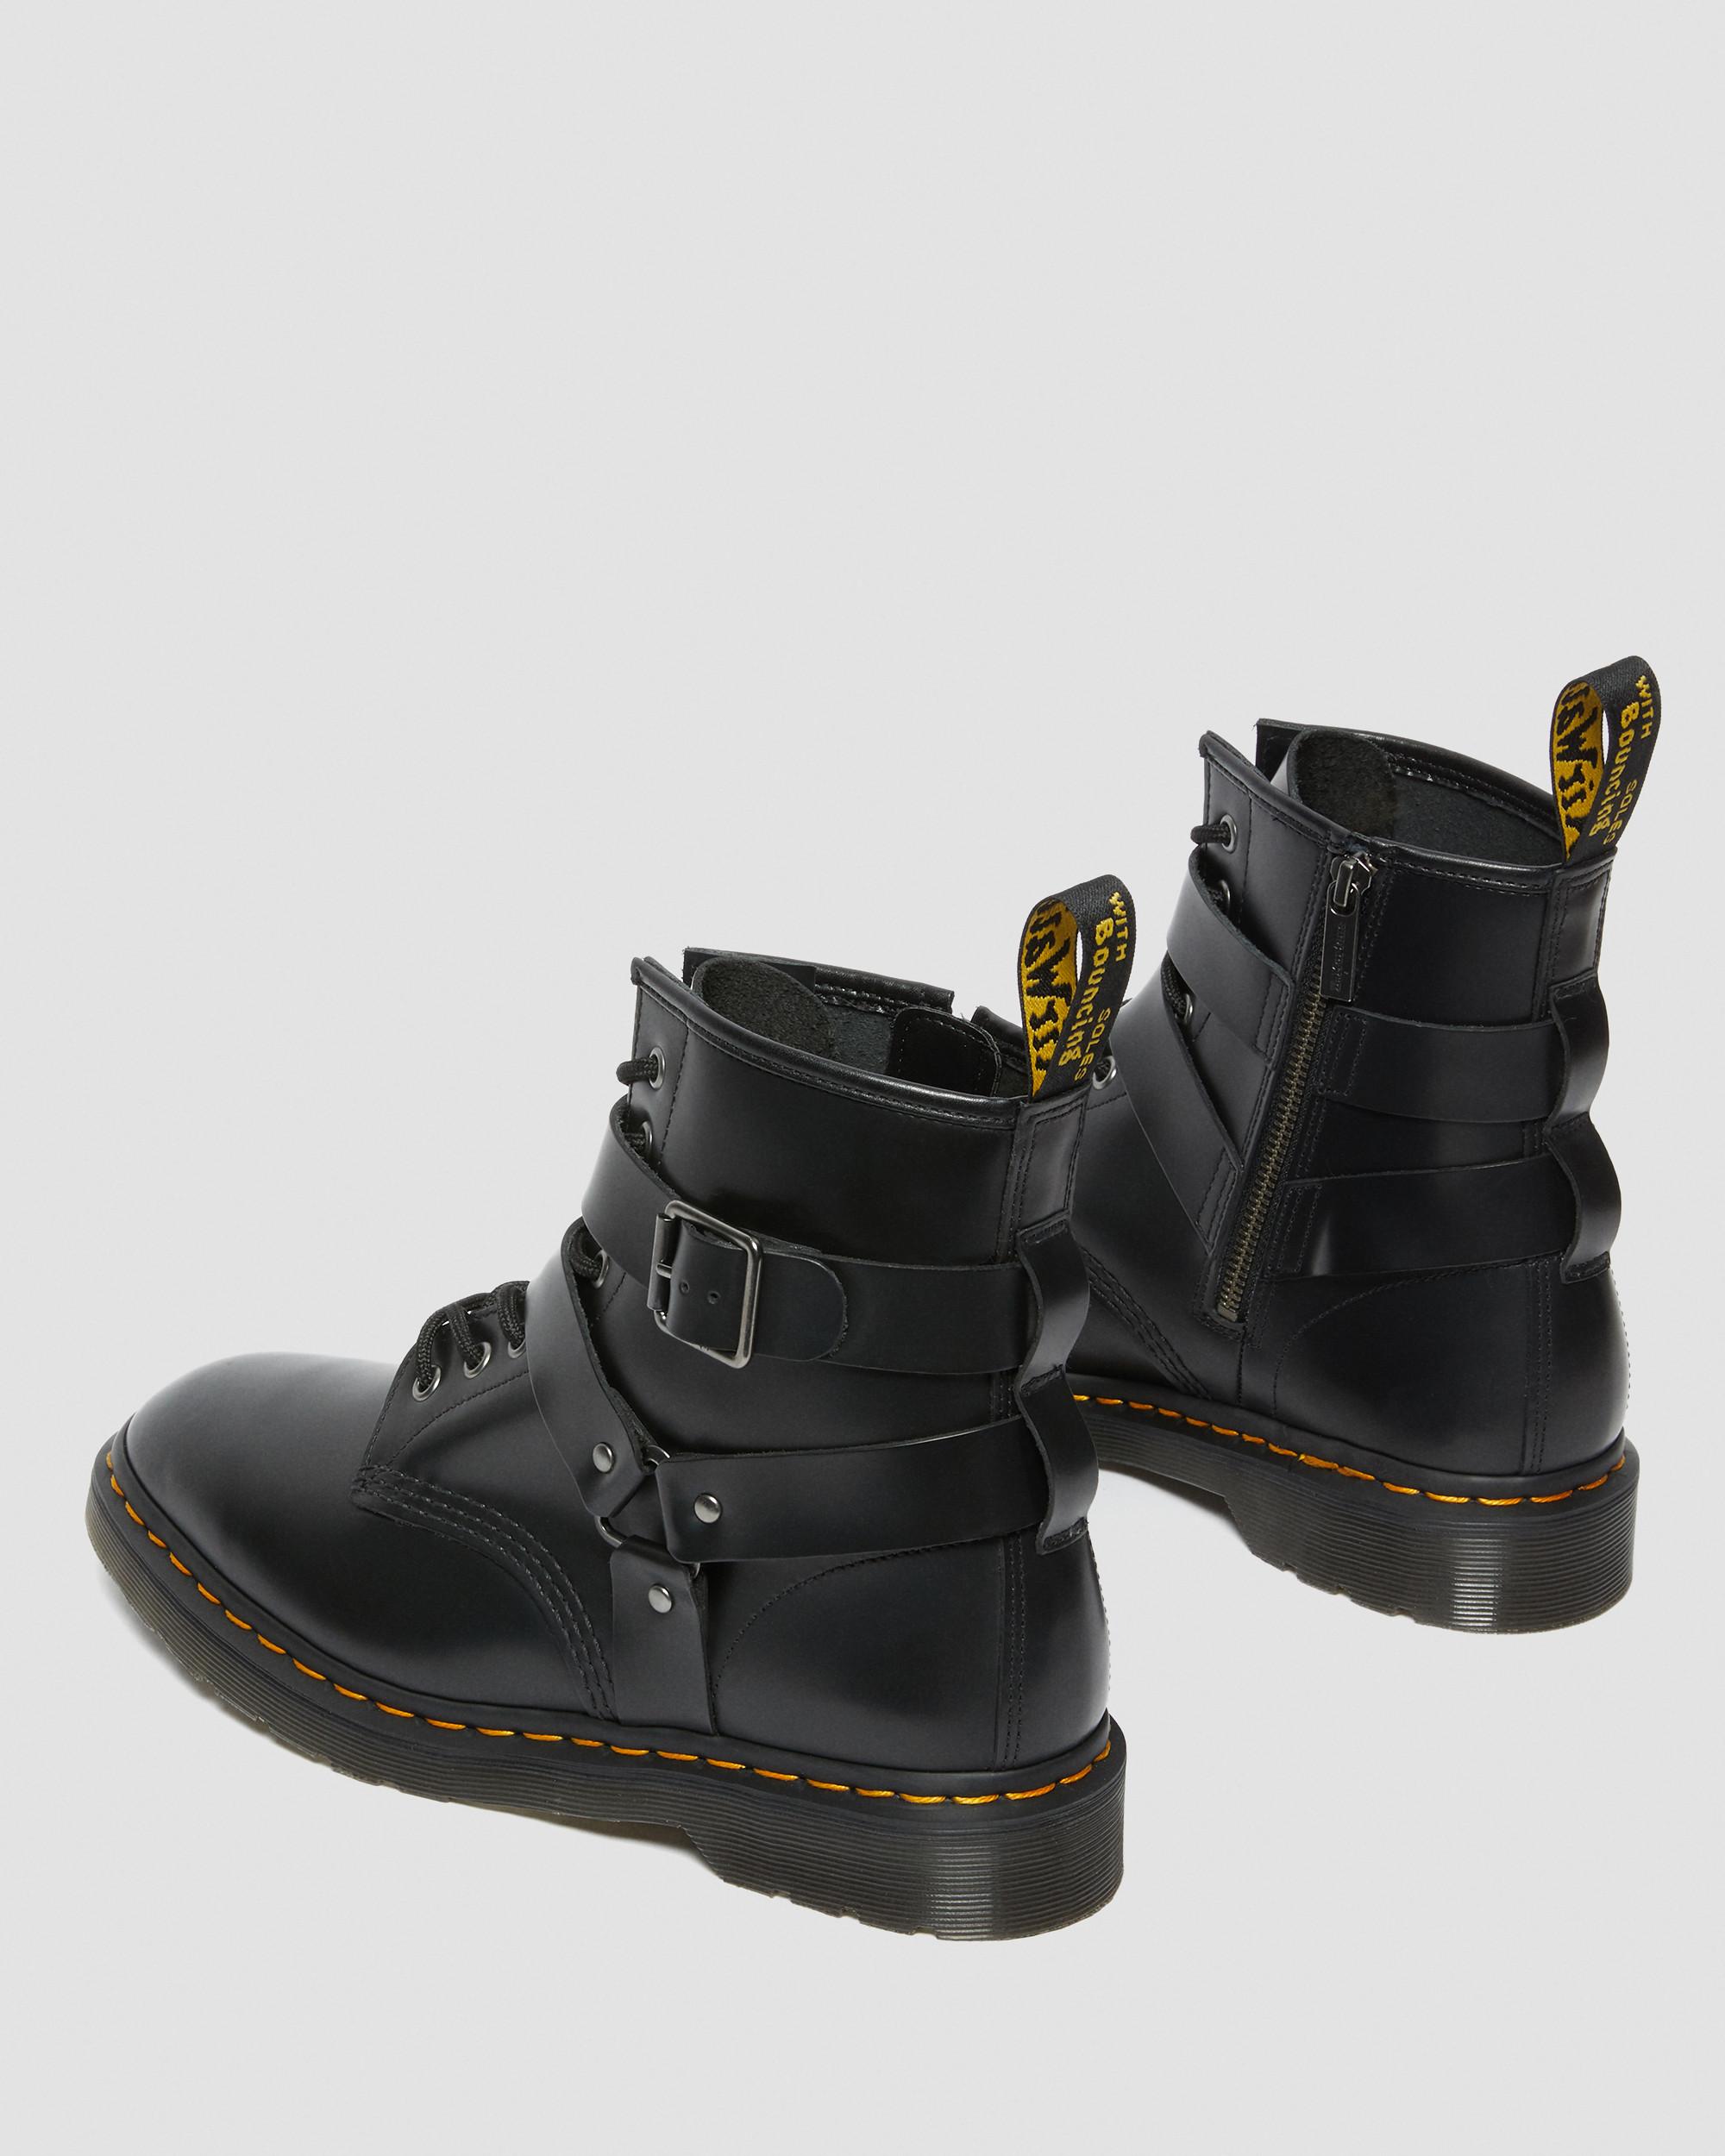 Cristofor Leather Harness Lace Up BootsCristofor Leather Harness Lace Up Boots Dr. Martens